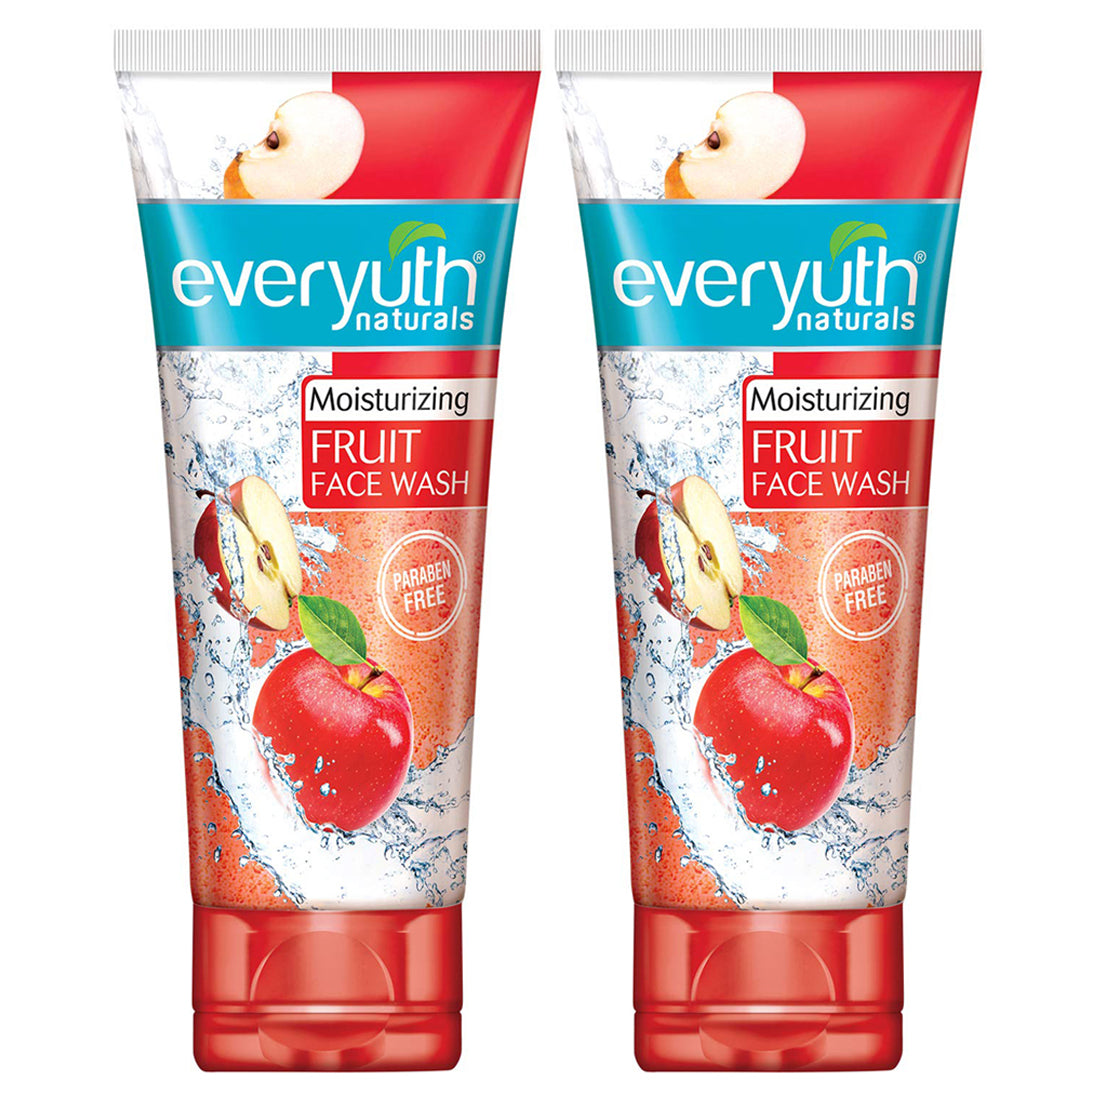 Everyuth Naturals Moisturizing Fruit Face Wash 150gm Pack Of 2